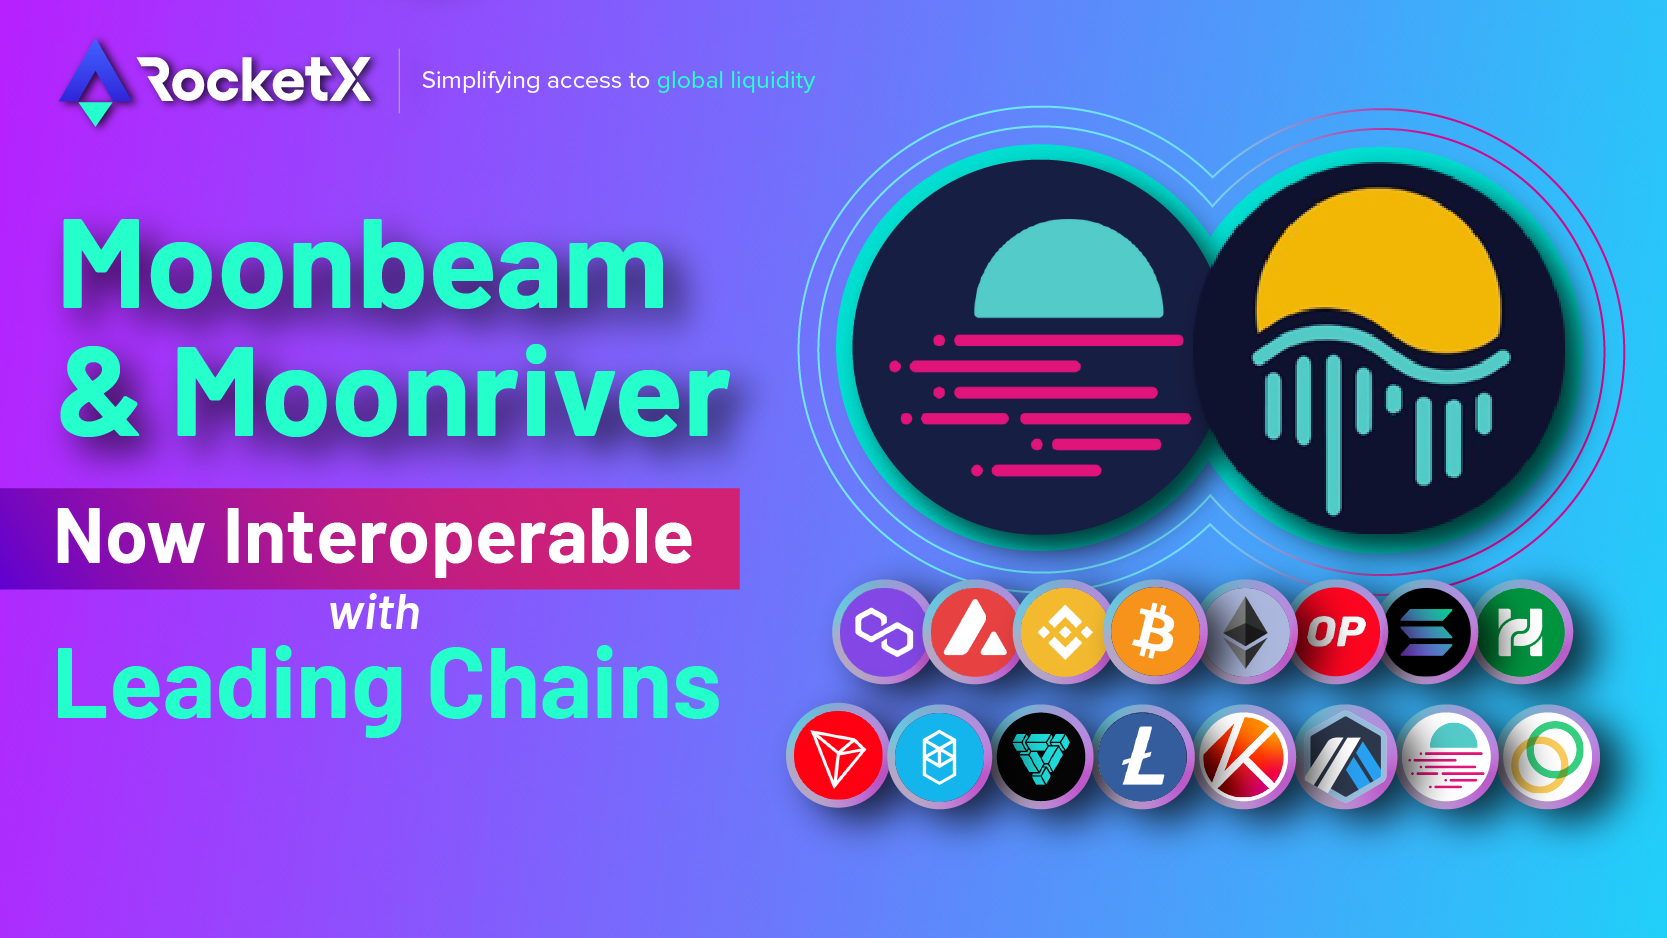 Moonbeam and Moonriver Networks are Now Interoperable with Bitcoin, Ethereum and 60+ leading blockchains